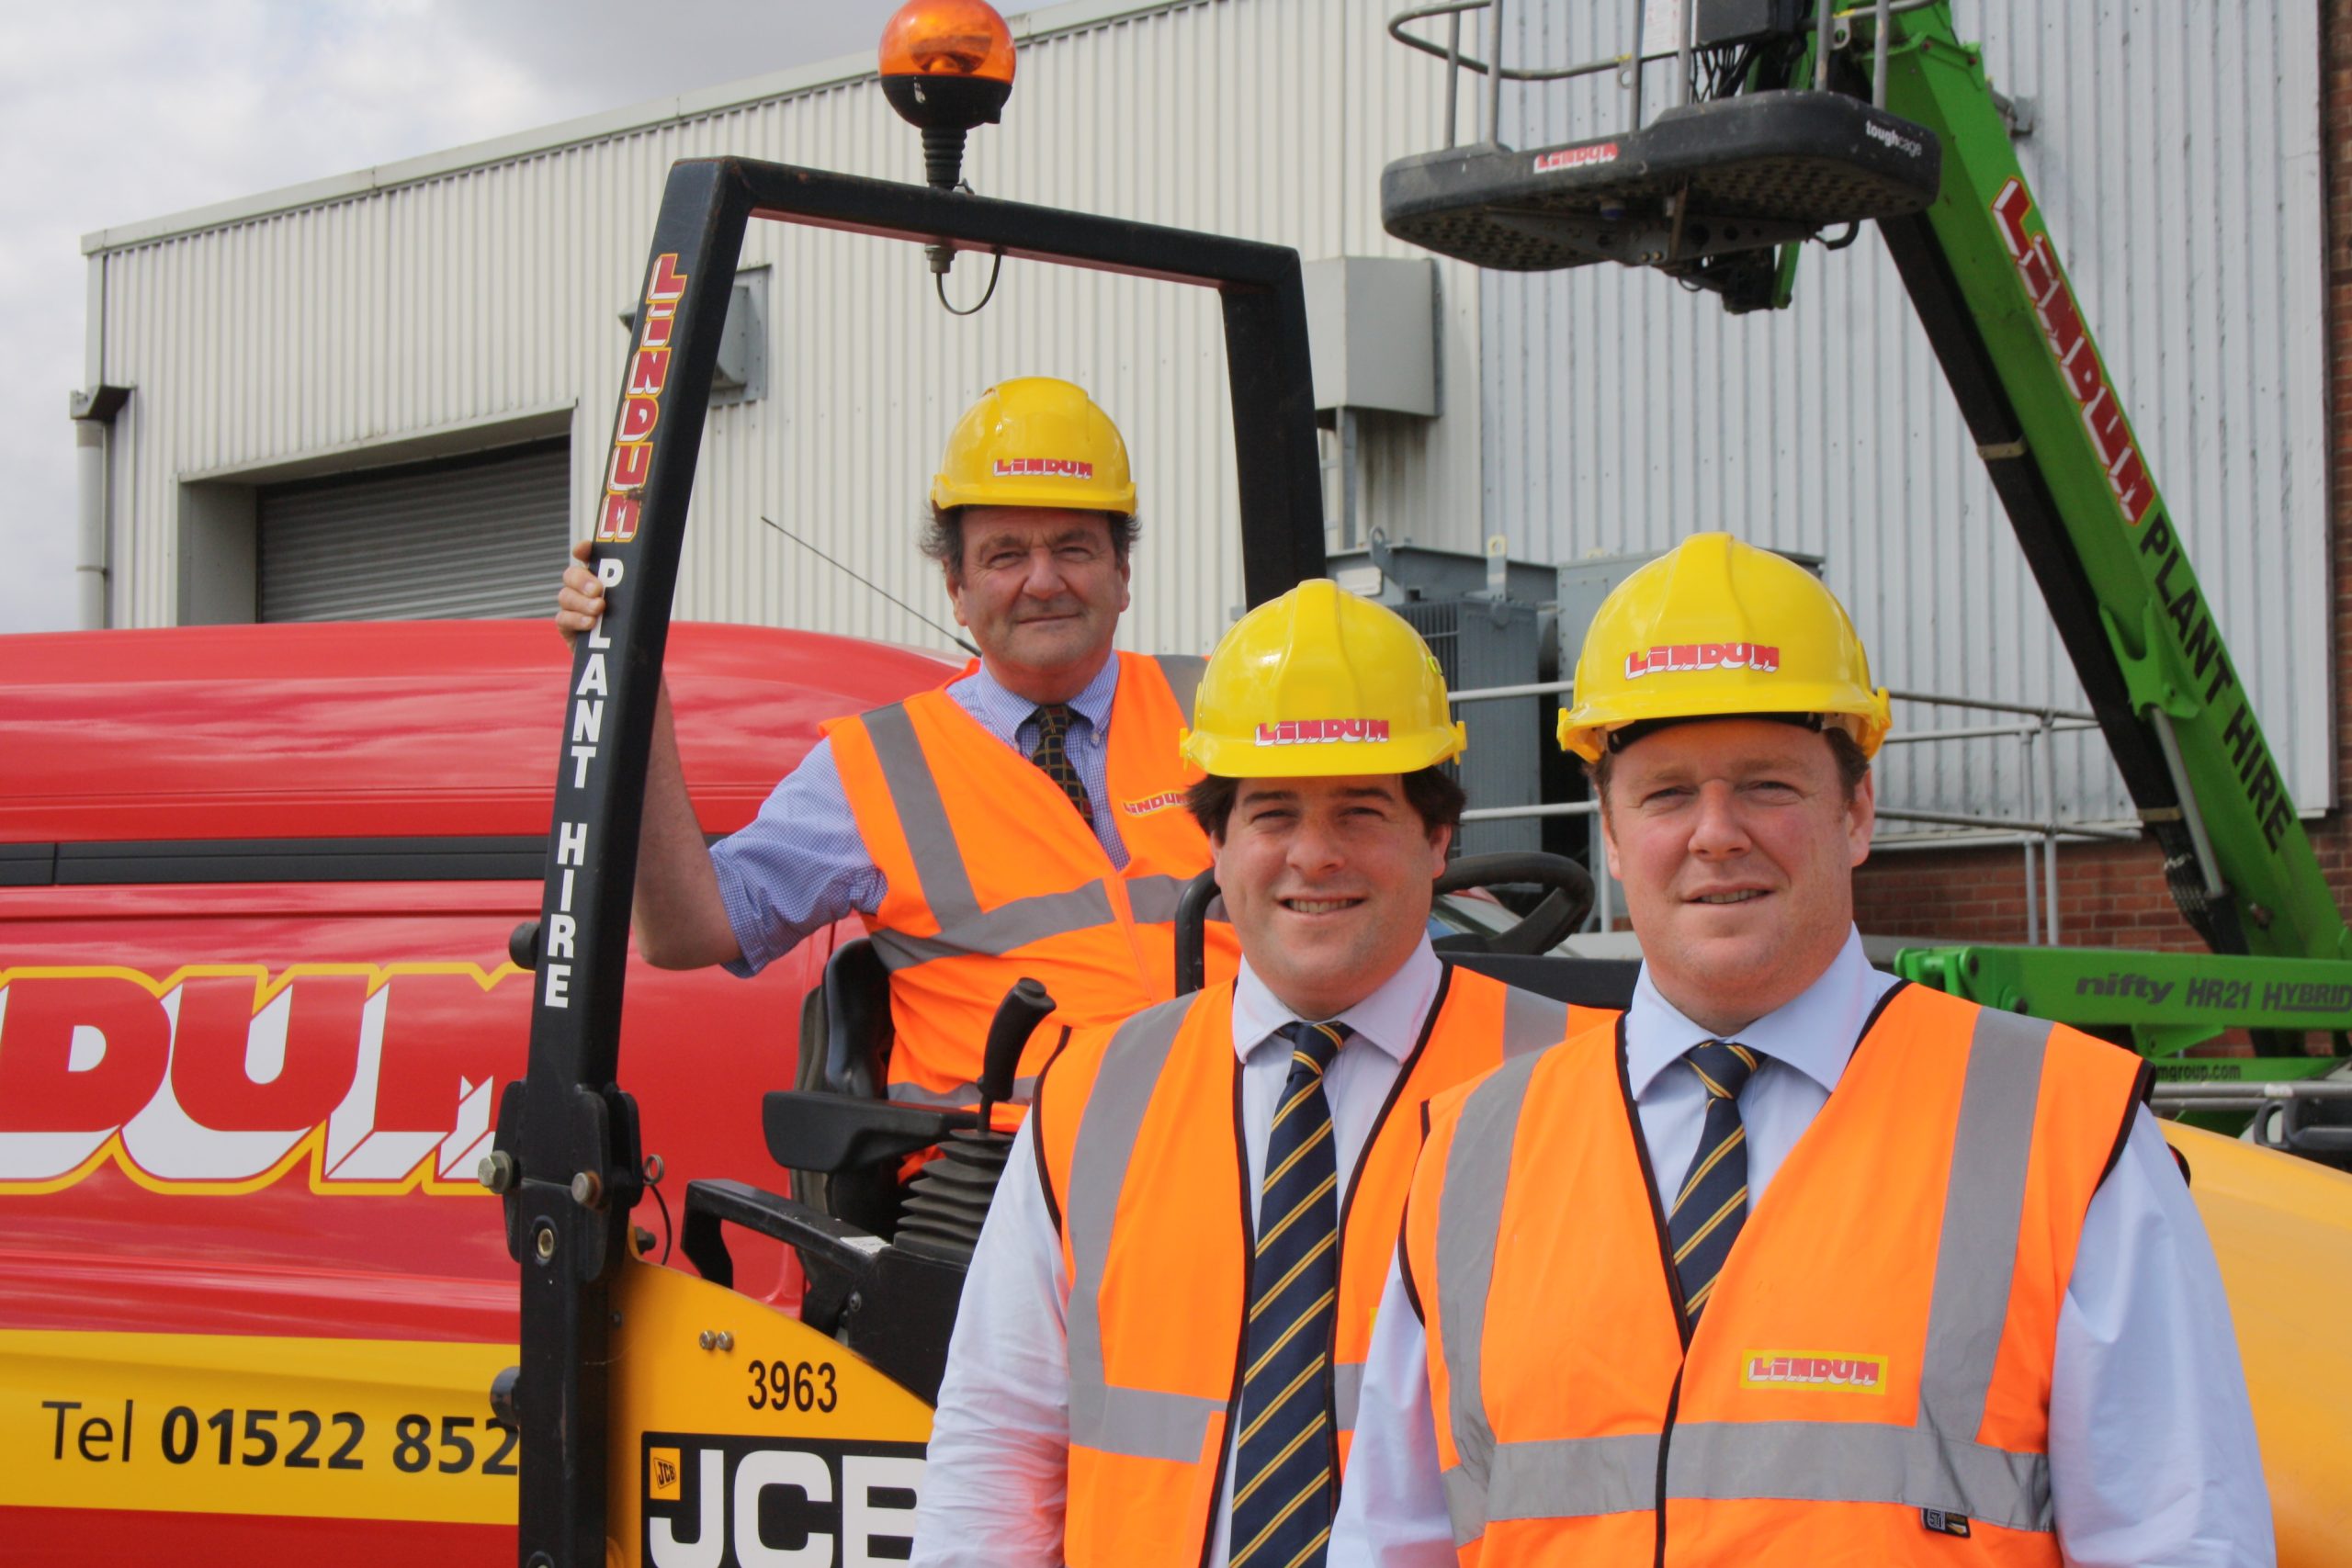 Brothers step up to be Co-Chairmen of Lindum Group